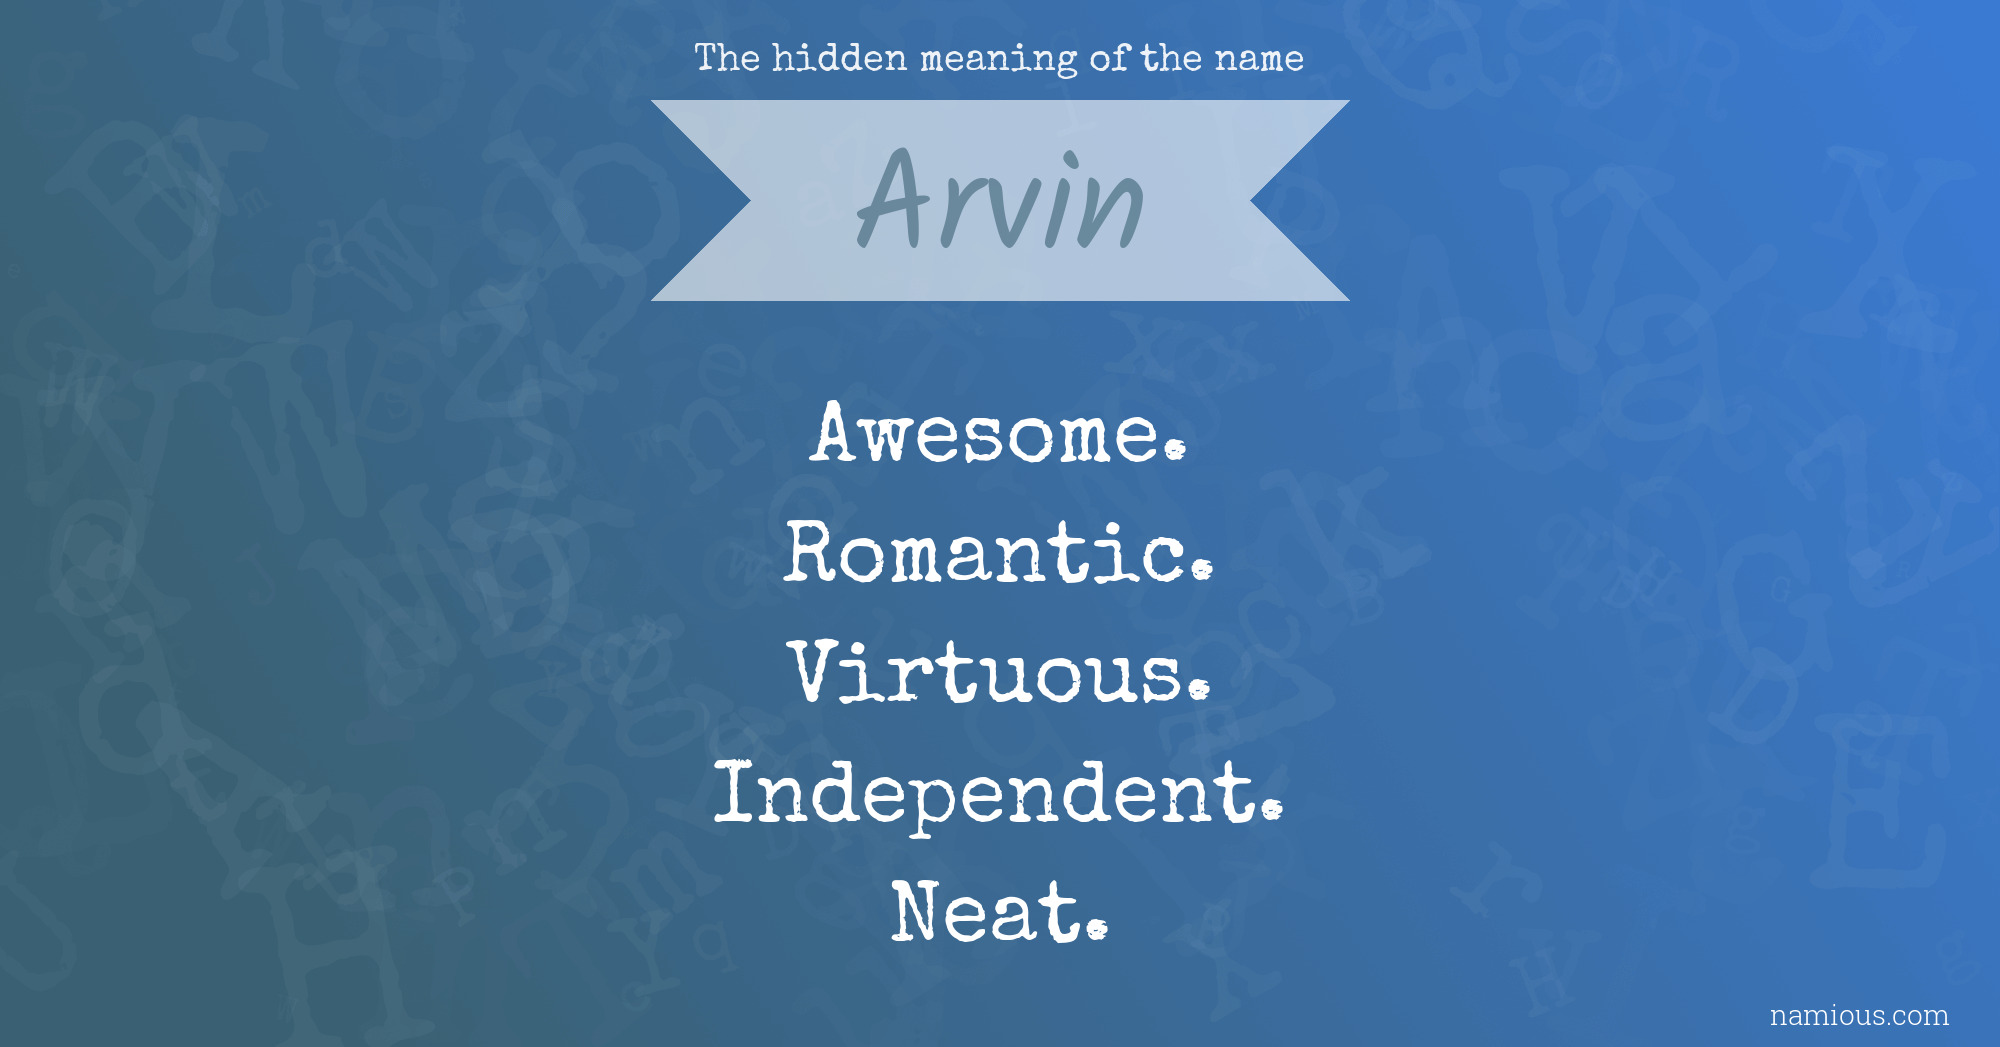 The hidden meaning of the name Arvin